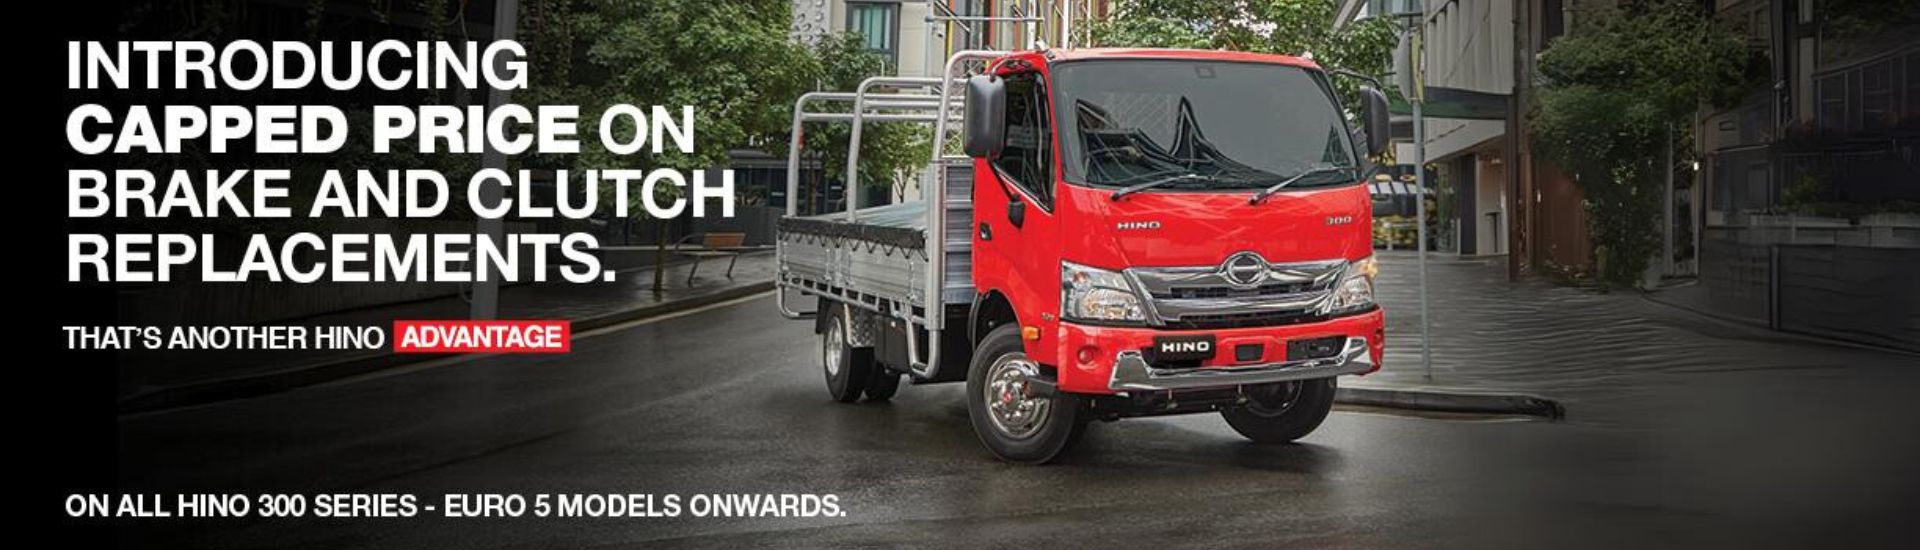 Introducing capped price on brake and clutch replacements. That's another Hino advantage. On all Hino 300 series - Euro 5 models onwards. 